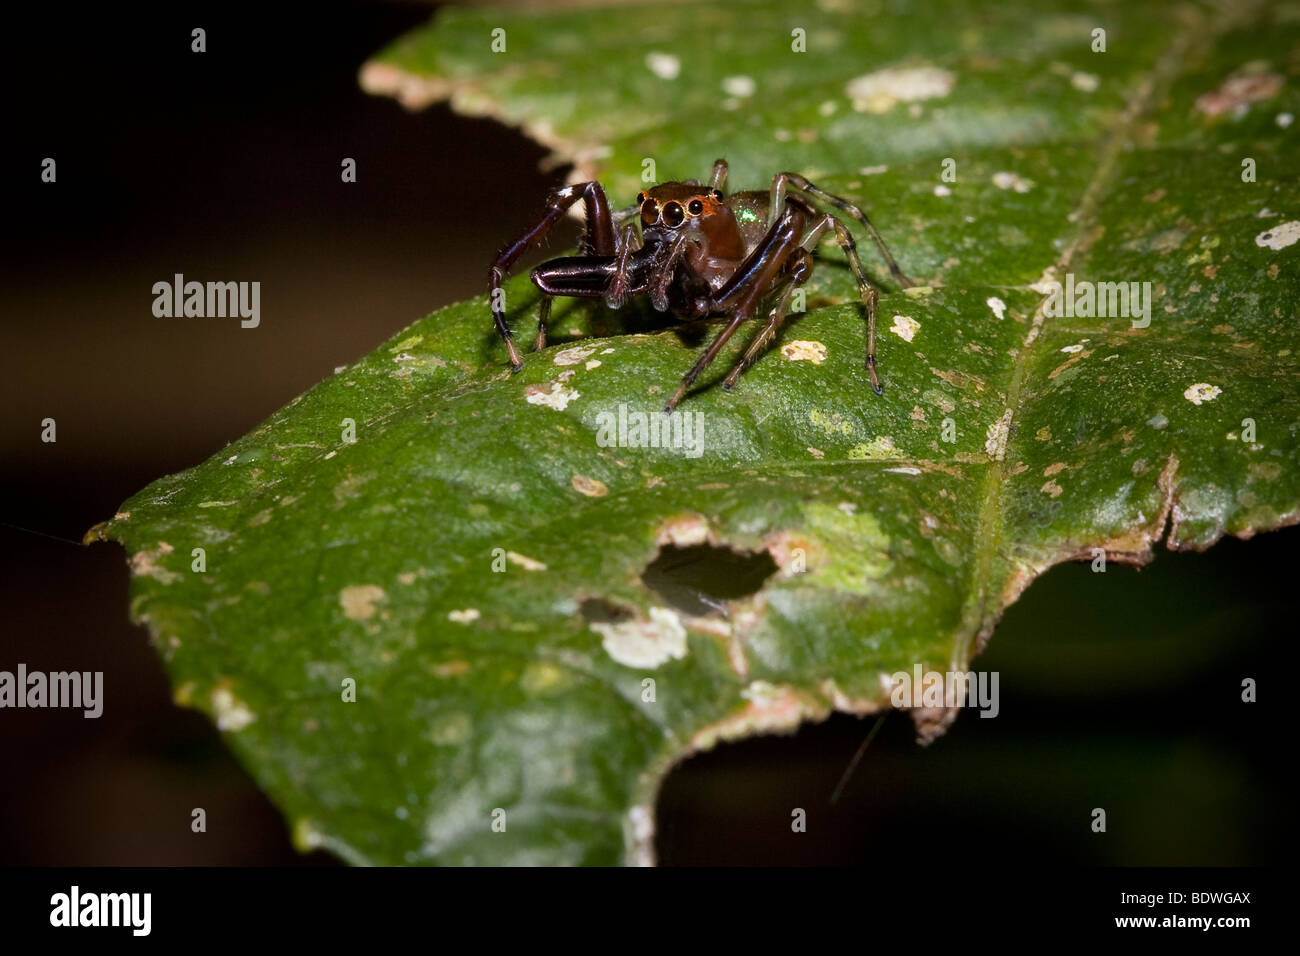 An ornate tropical jumping spider, family Salticidae, with large chelicerae. Photographed in Costa Rica. Stock Photo